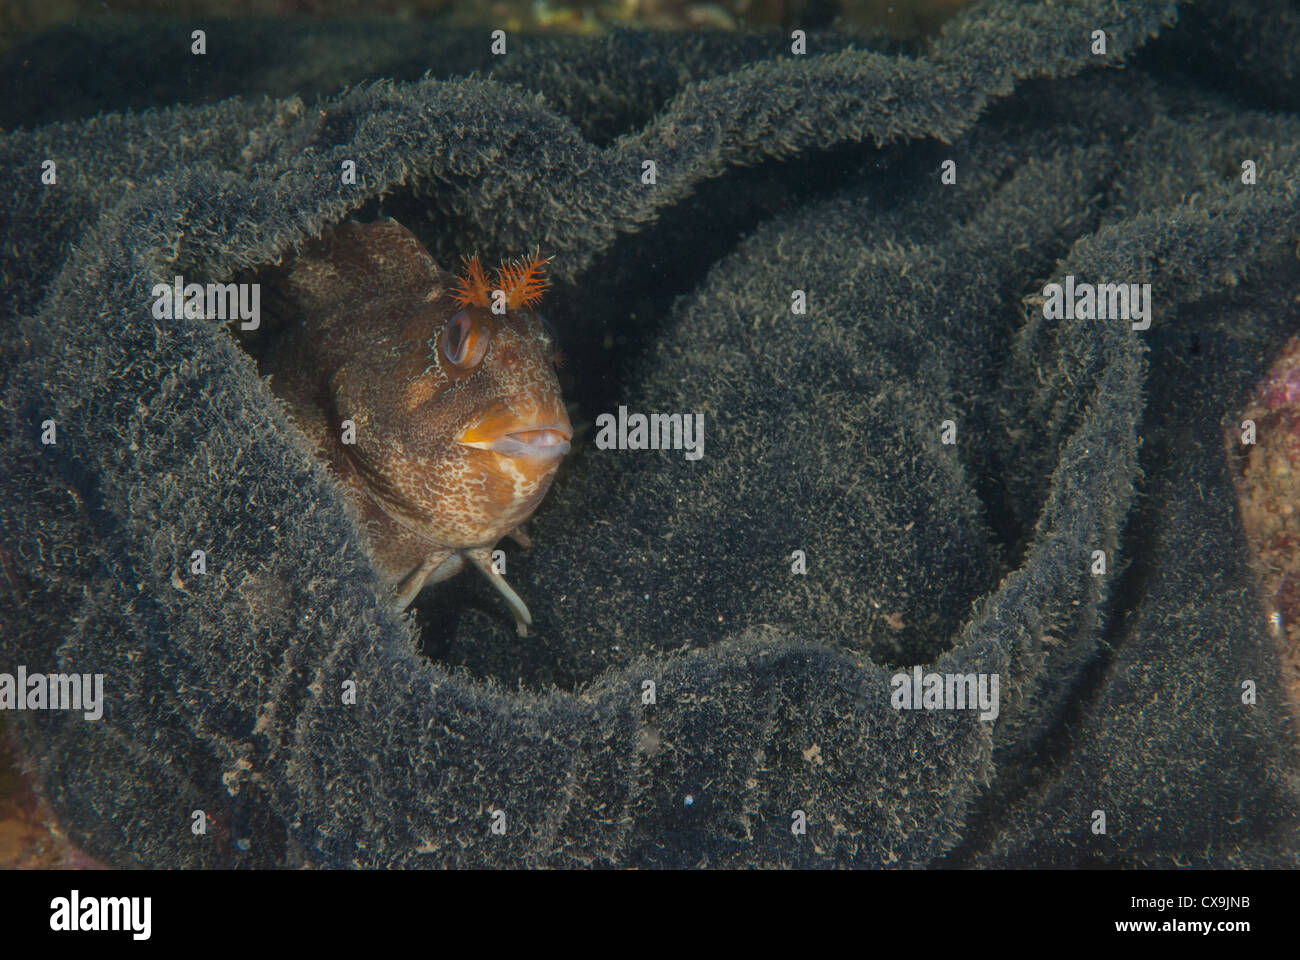 Tompot blenny makes itself at home in a discarded pair of underpants. Swanage Pier Stock Photo